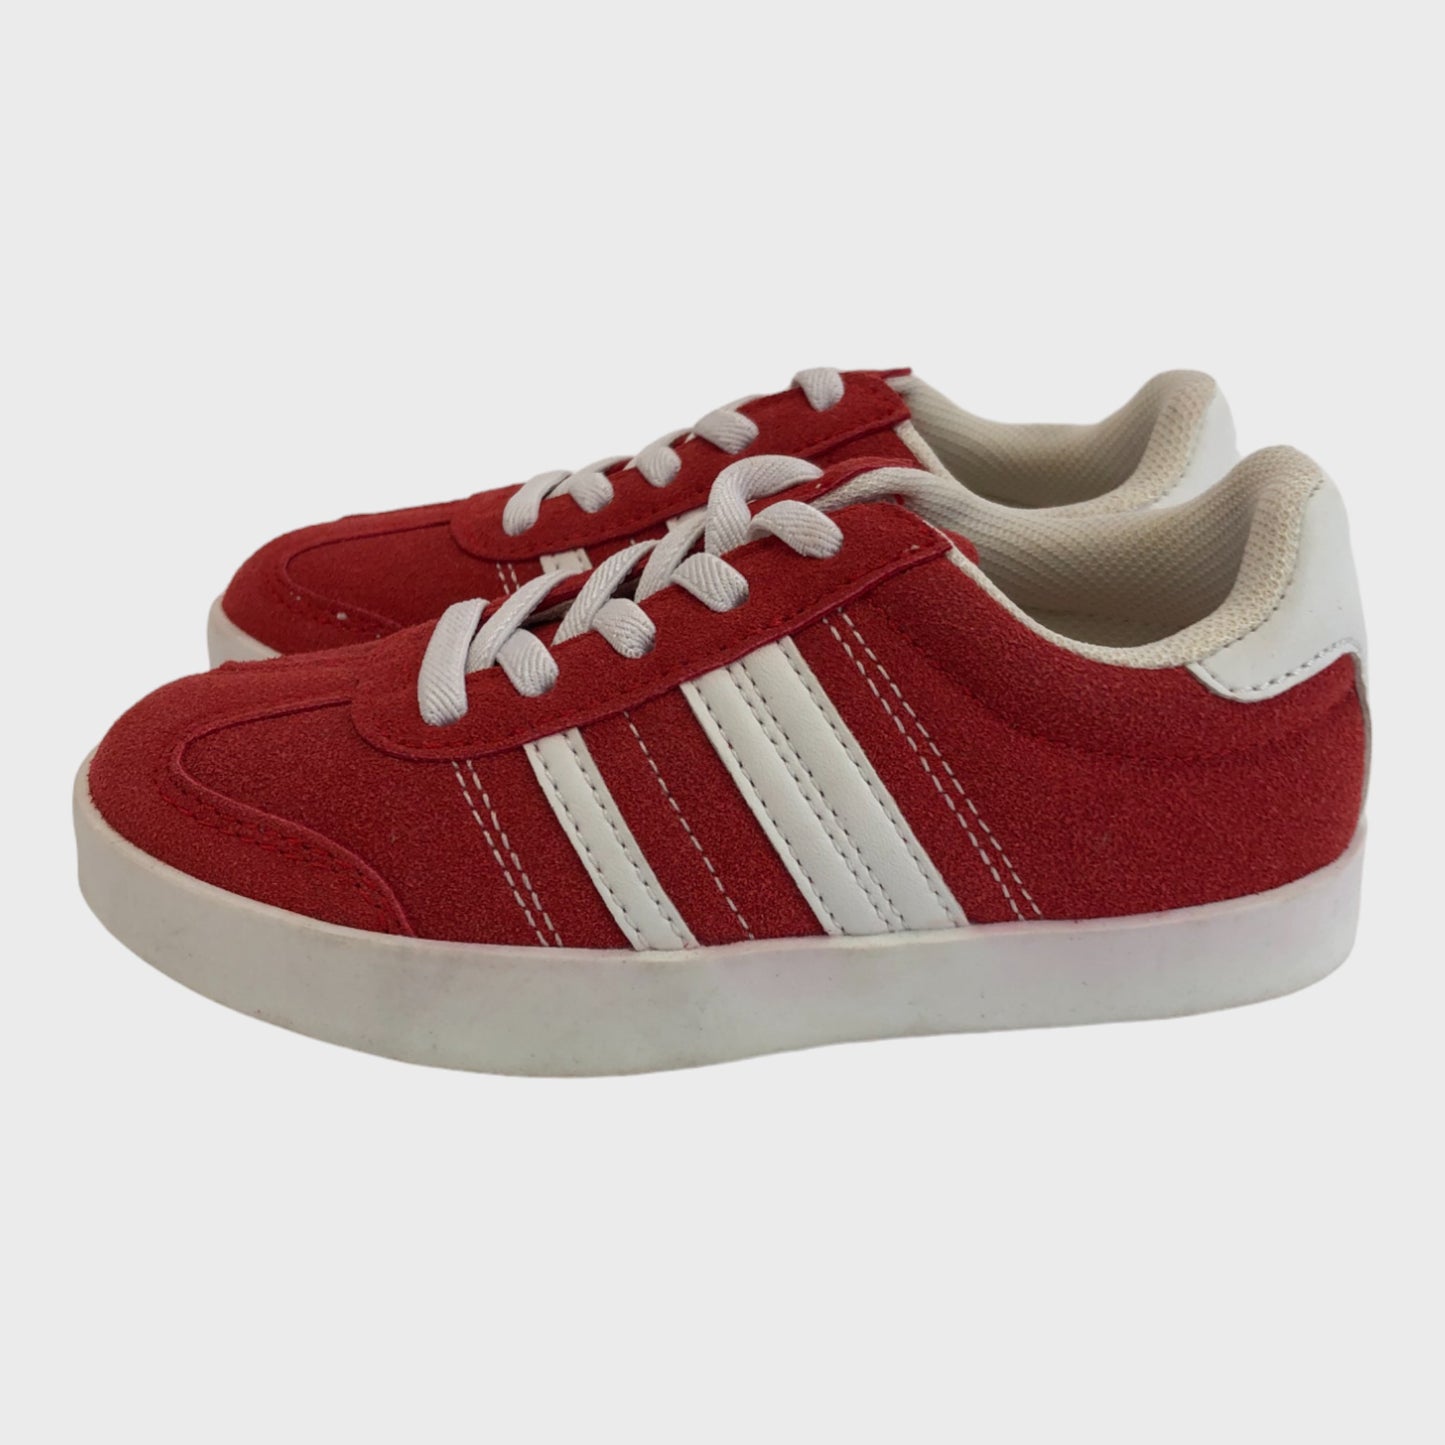 Kids Retro Synthetic Suede Trainers